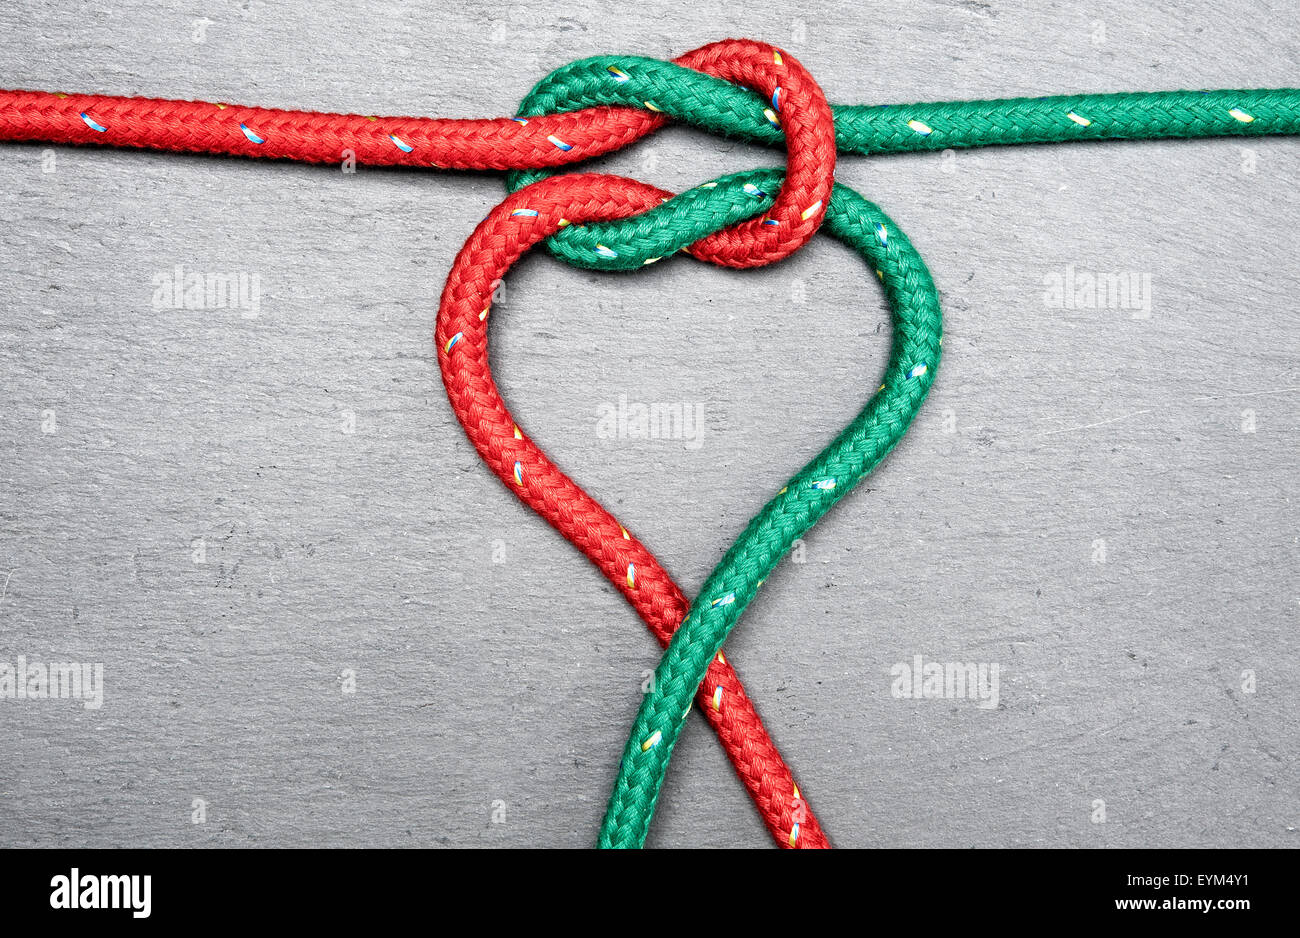 Ropes, rope, knot, heart form, red, green, Stock Photo